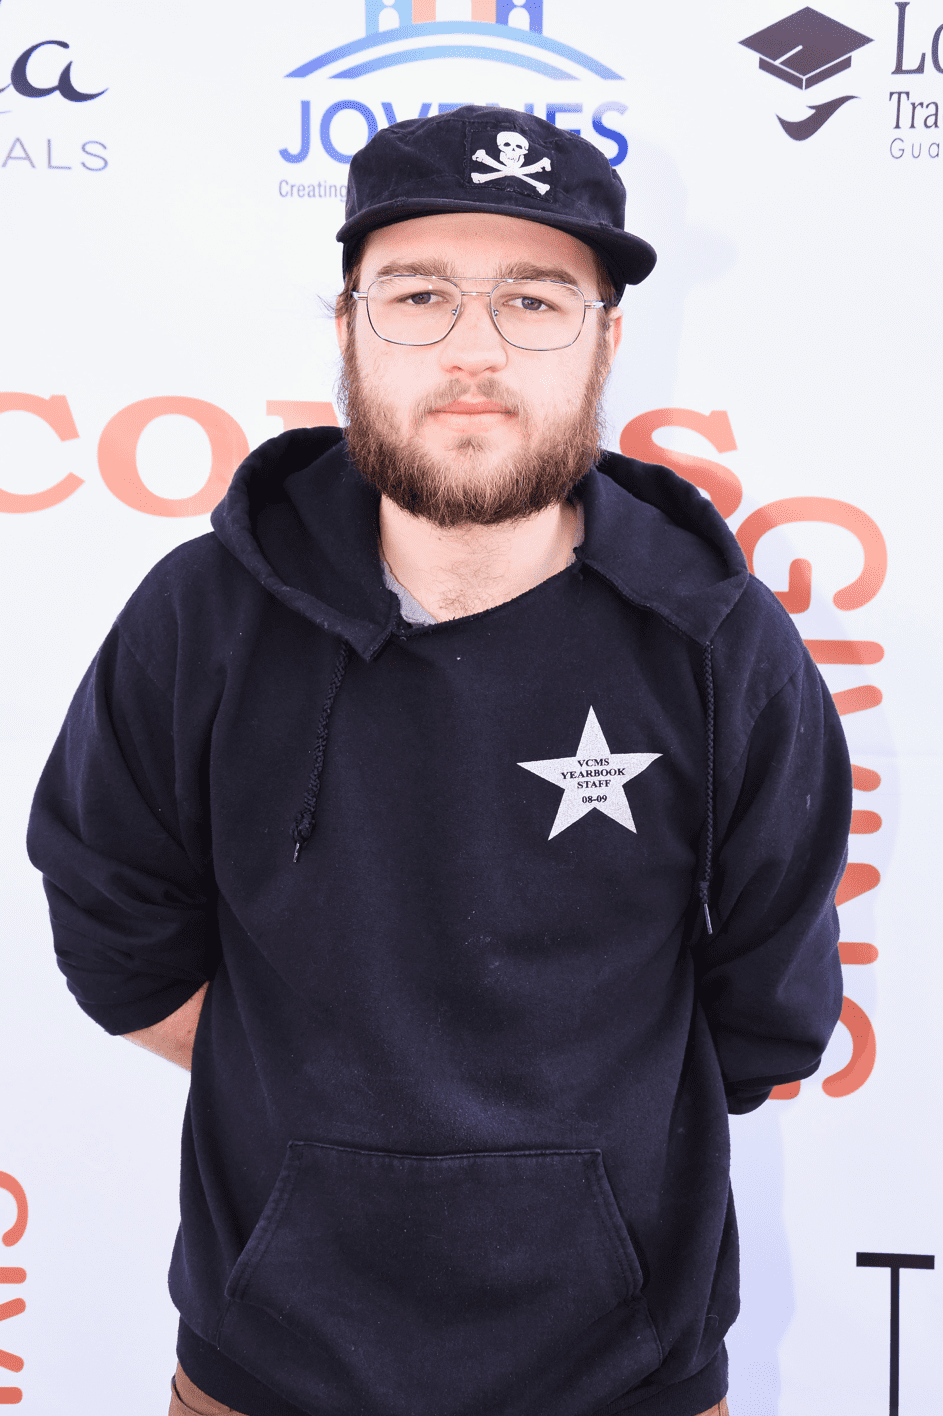 Angus T. Jones beim 1. Annual Combsgiving Festival am Food Haus am 22.11.16 in Los Angeles. | Quelle: Getty Images